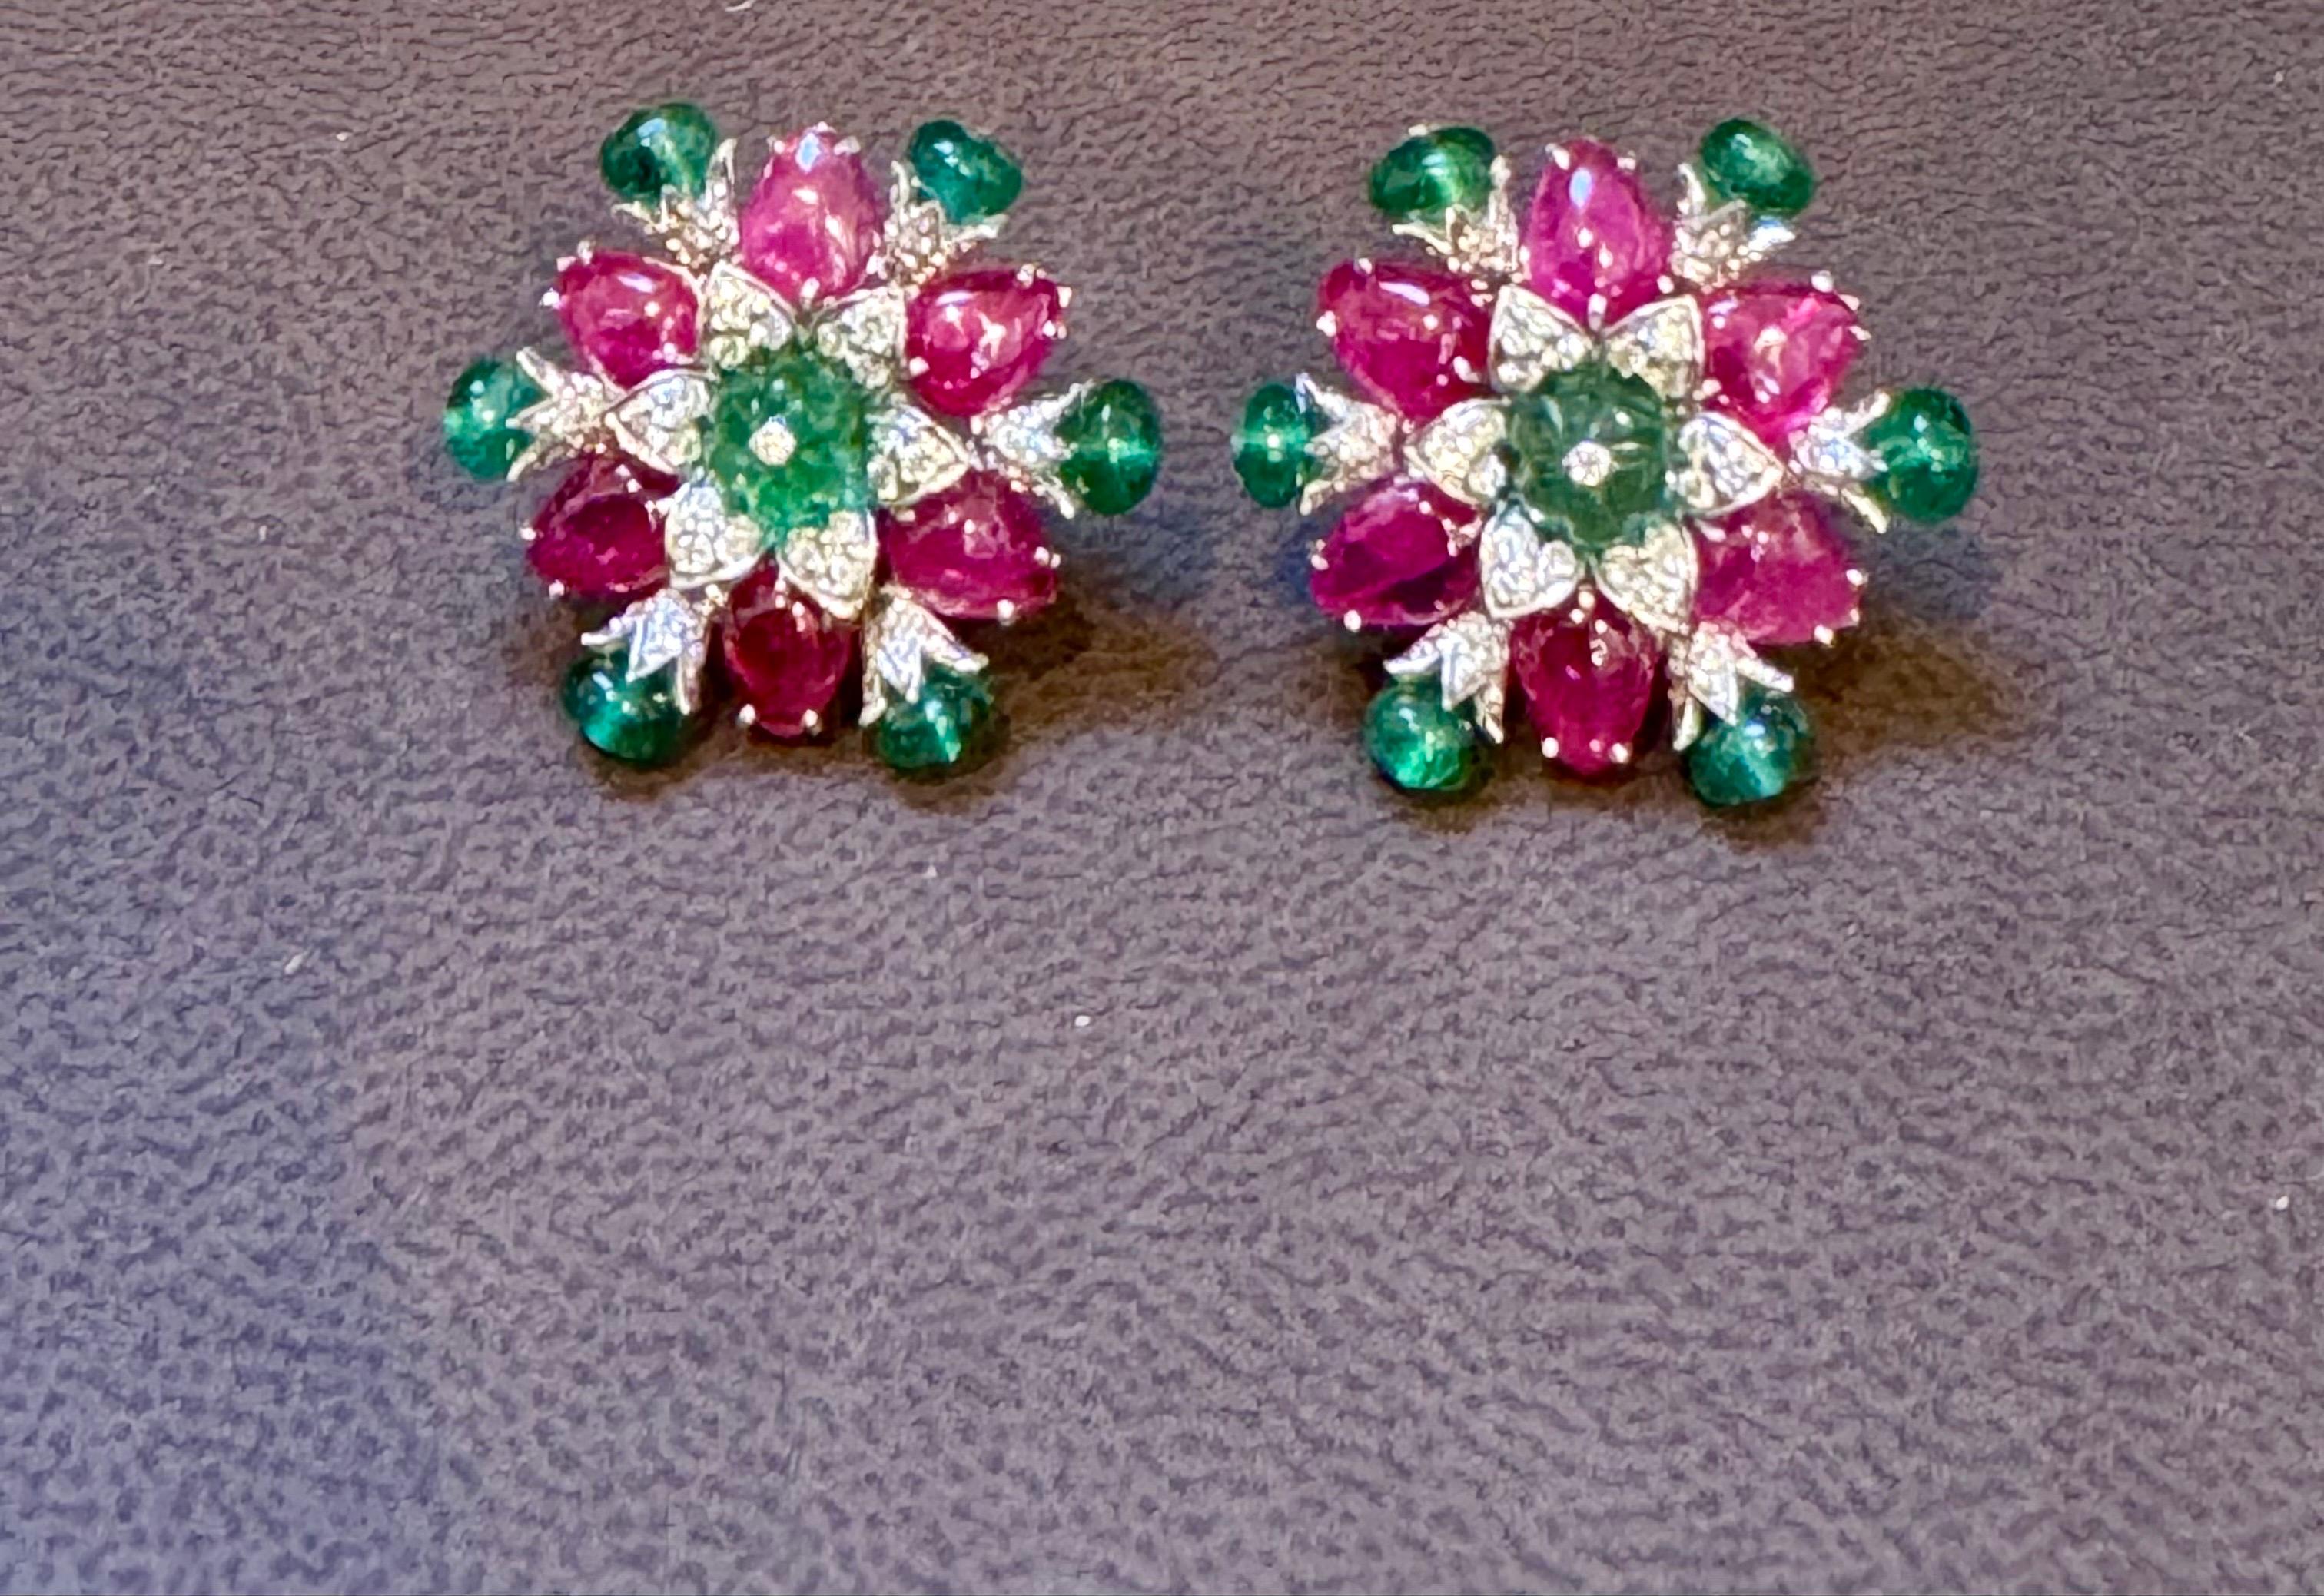 Tutti Frutti Earrings/ Natural  Emerald Rubellite Earrings/ Carving Leaf 18 Karat white Gold.
Discover elegance in our carved Rubellite and Emerald Diamond Post Earrings crafted with 18 Karat White Gold. The earrings feature  finely carved  emeralds